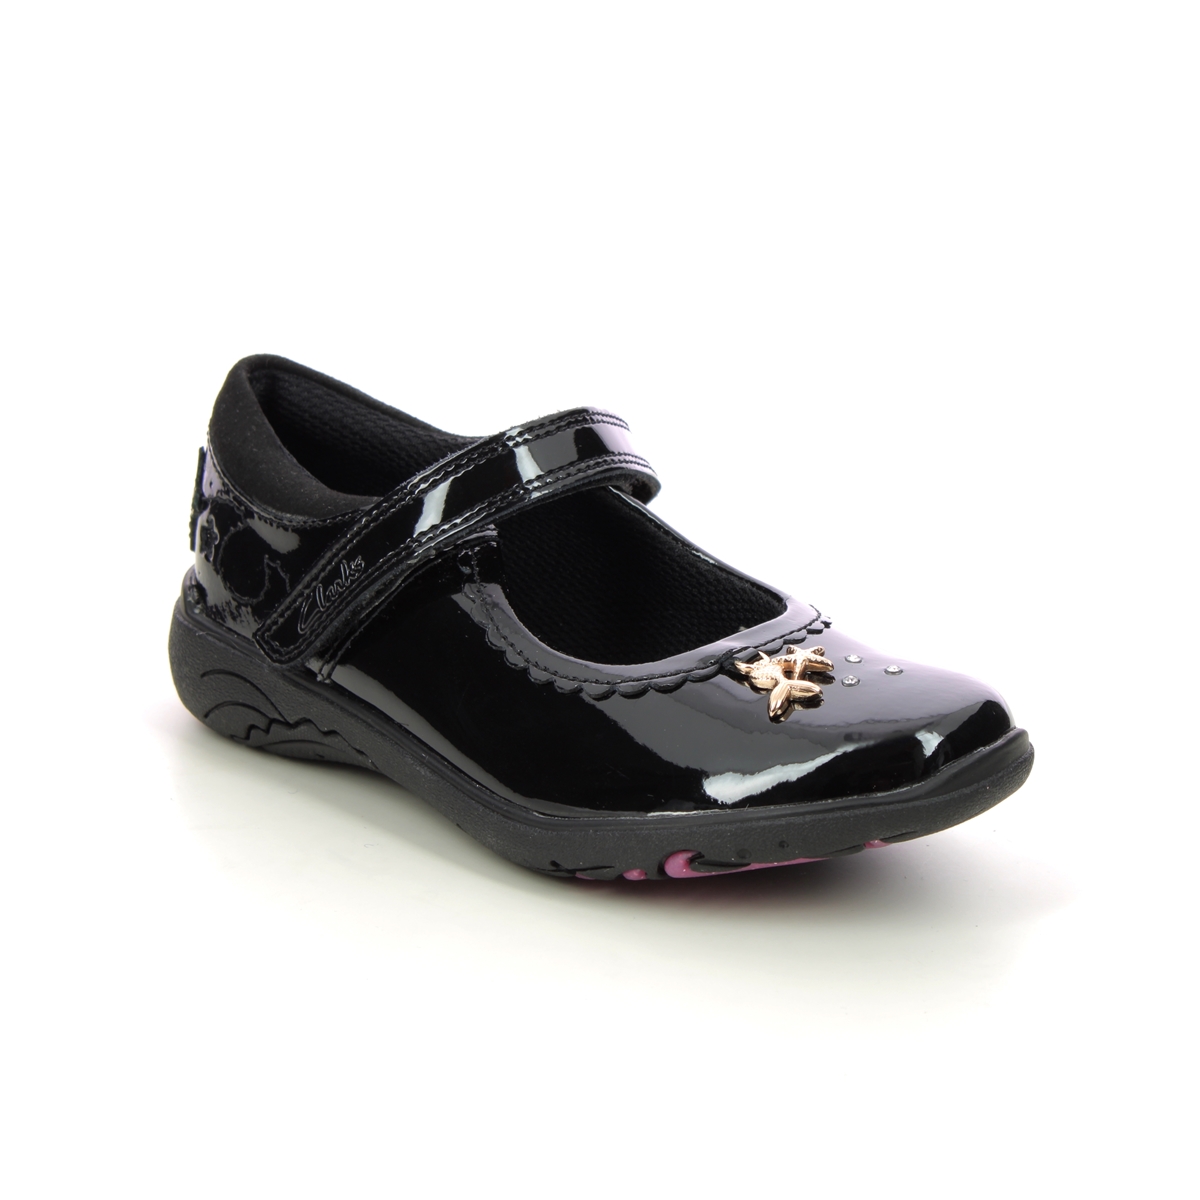 Clarks Relda Sea K Mary Jane Black Patent Kids Girls School Shoes 722418H In Size 2.5 In Plain Black Patent H Width Fitting Extra Wide For School For